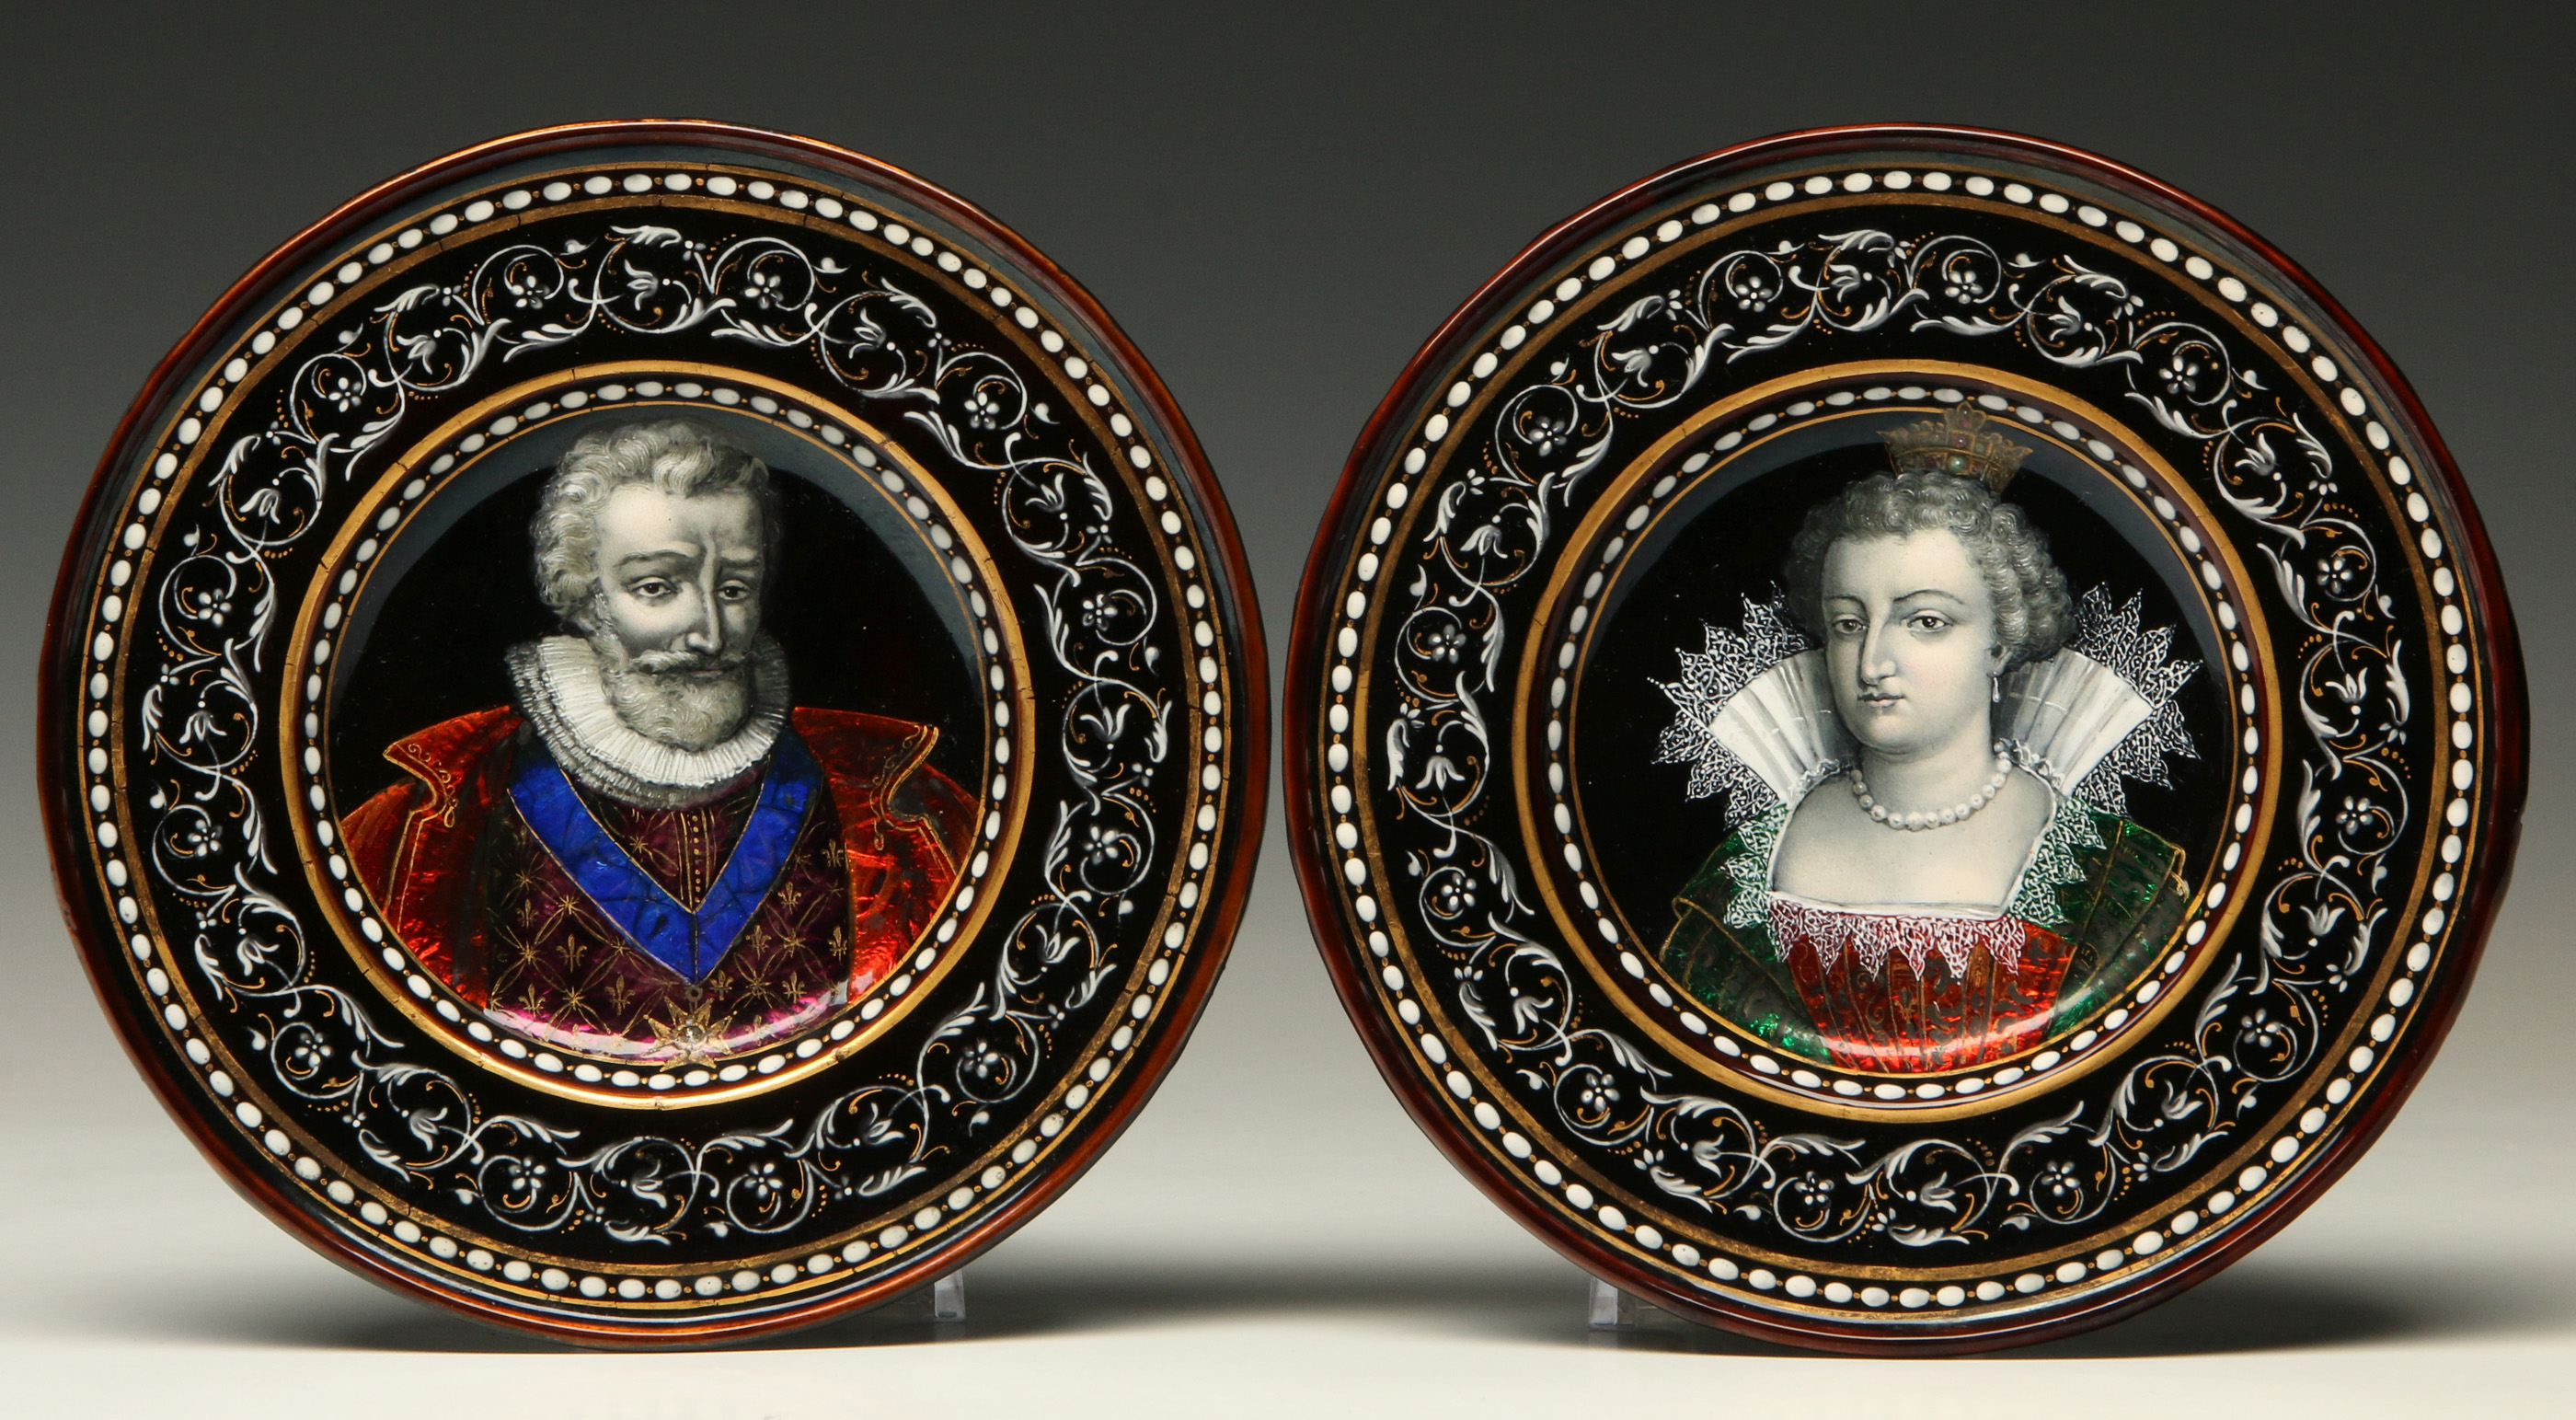 A PAIR OF 19TH C. LIMOGES KILN FIRED ENAMEL PLAQUE